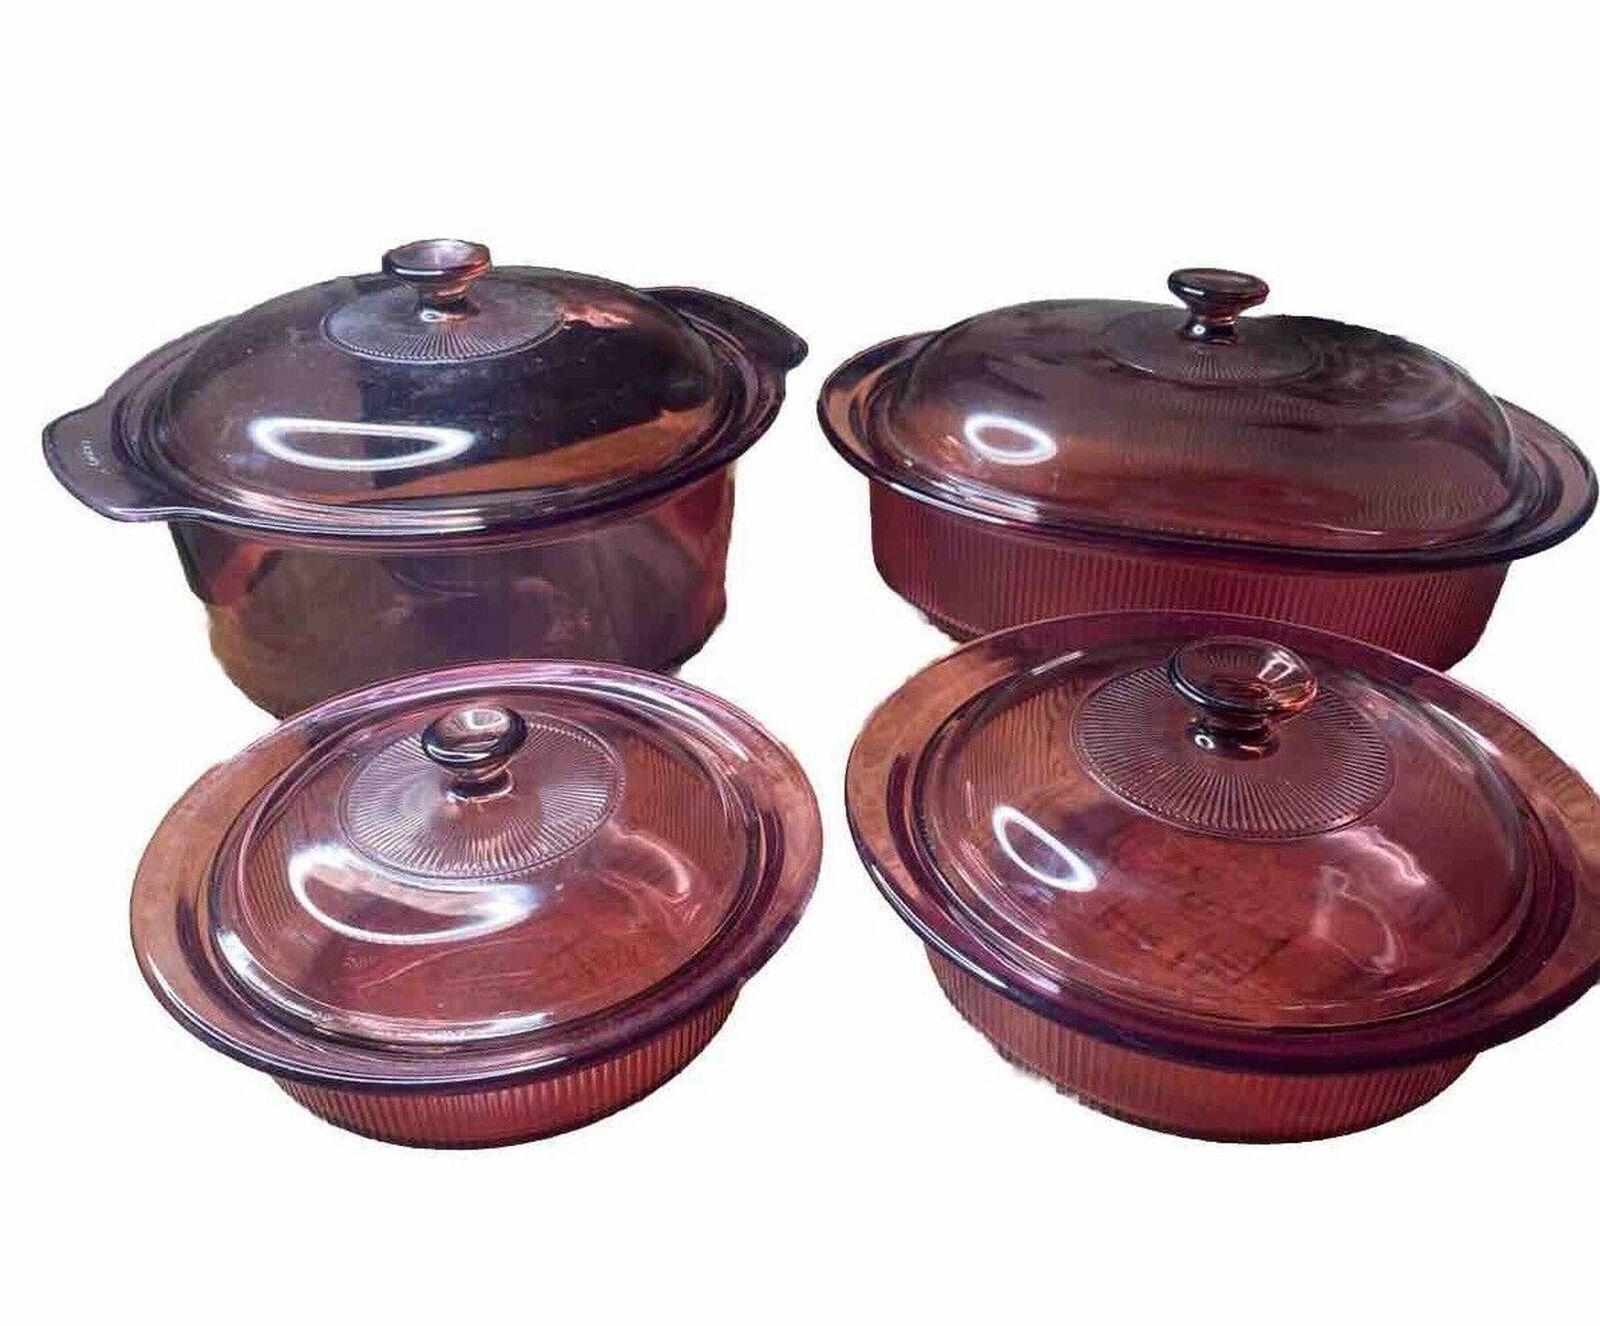 8-Piece set 1990’s Corning Vision Cookware Cranberry Vintage Rare Find Ribbed